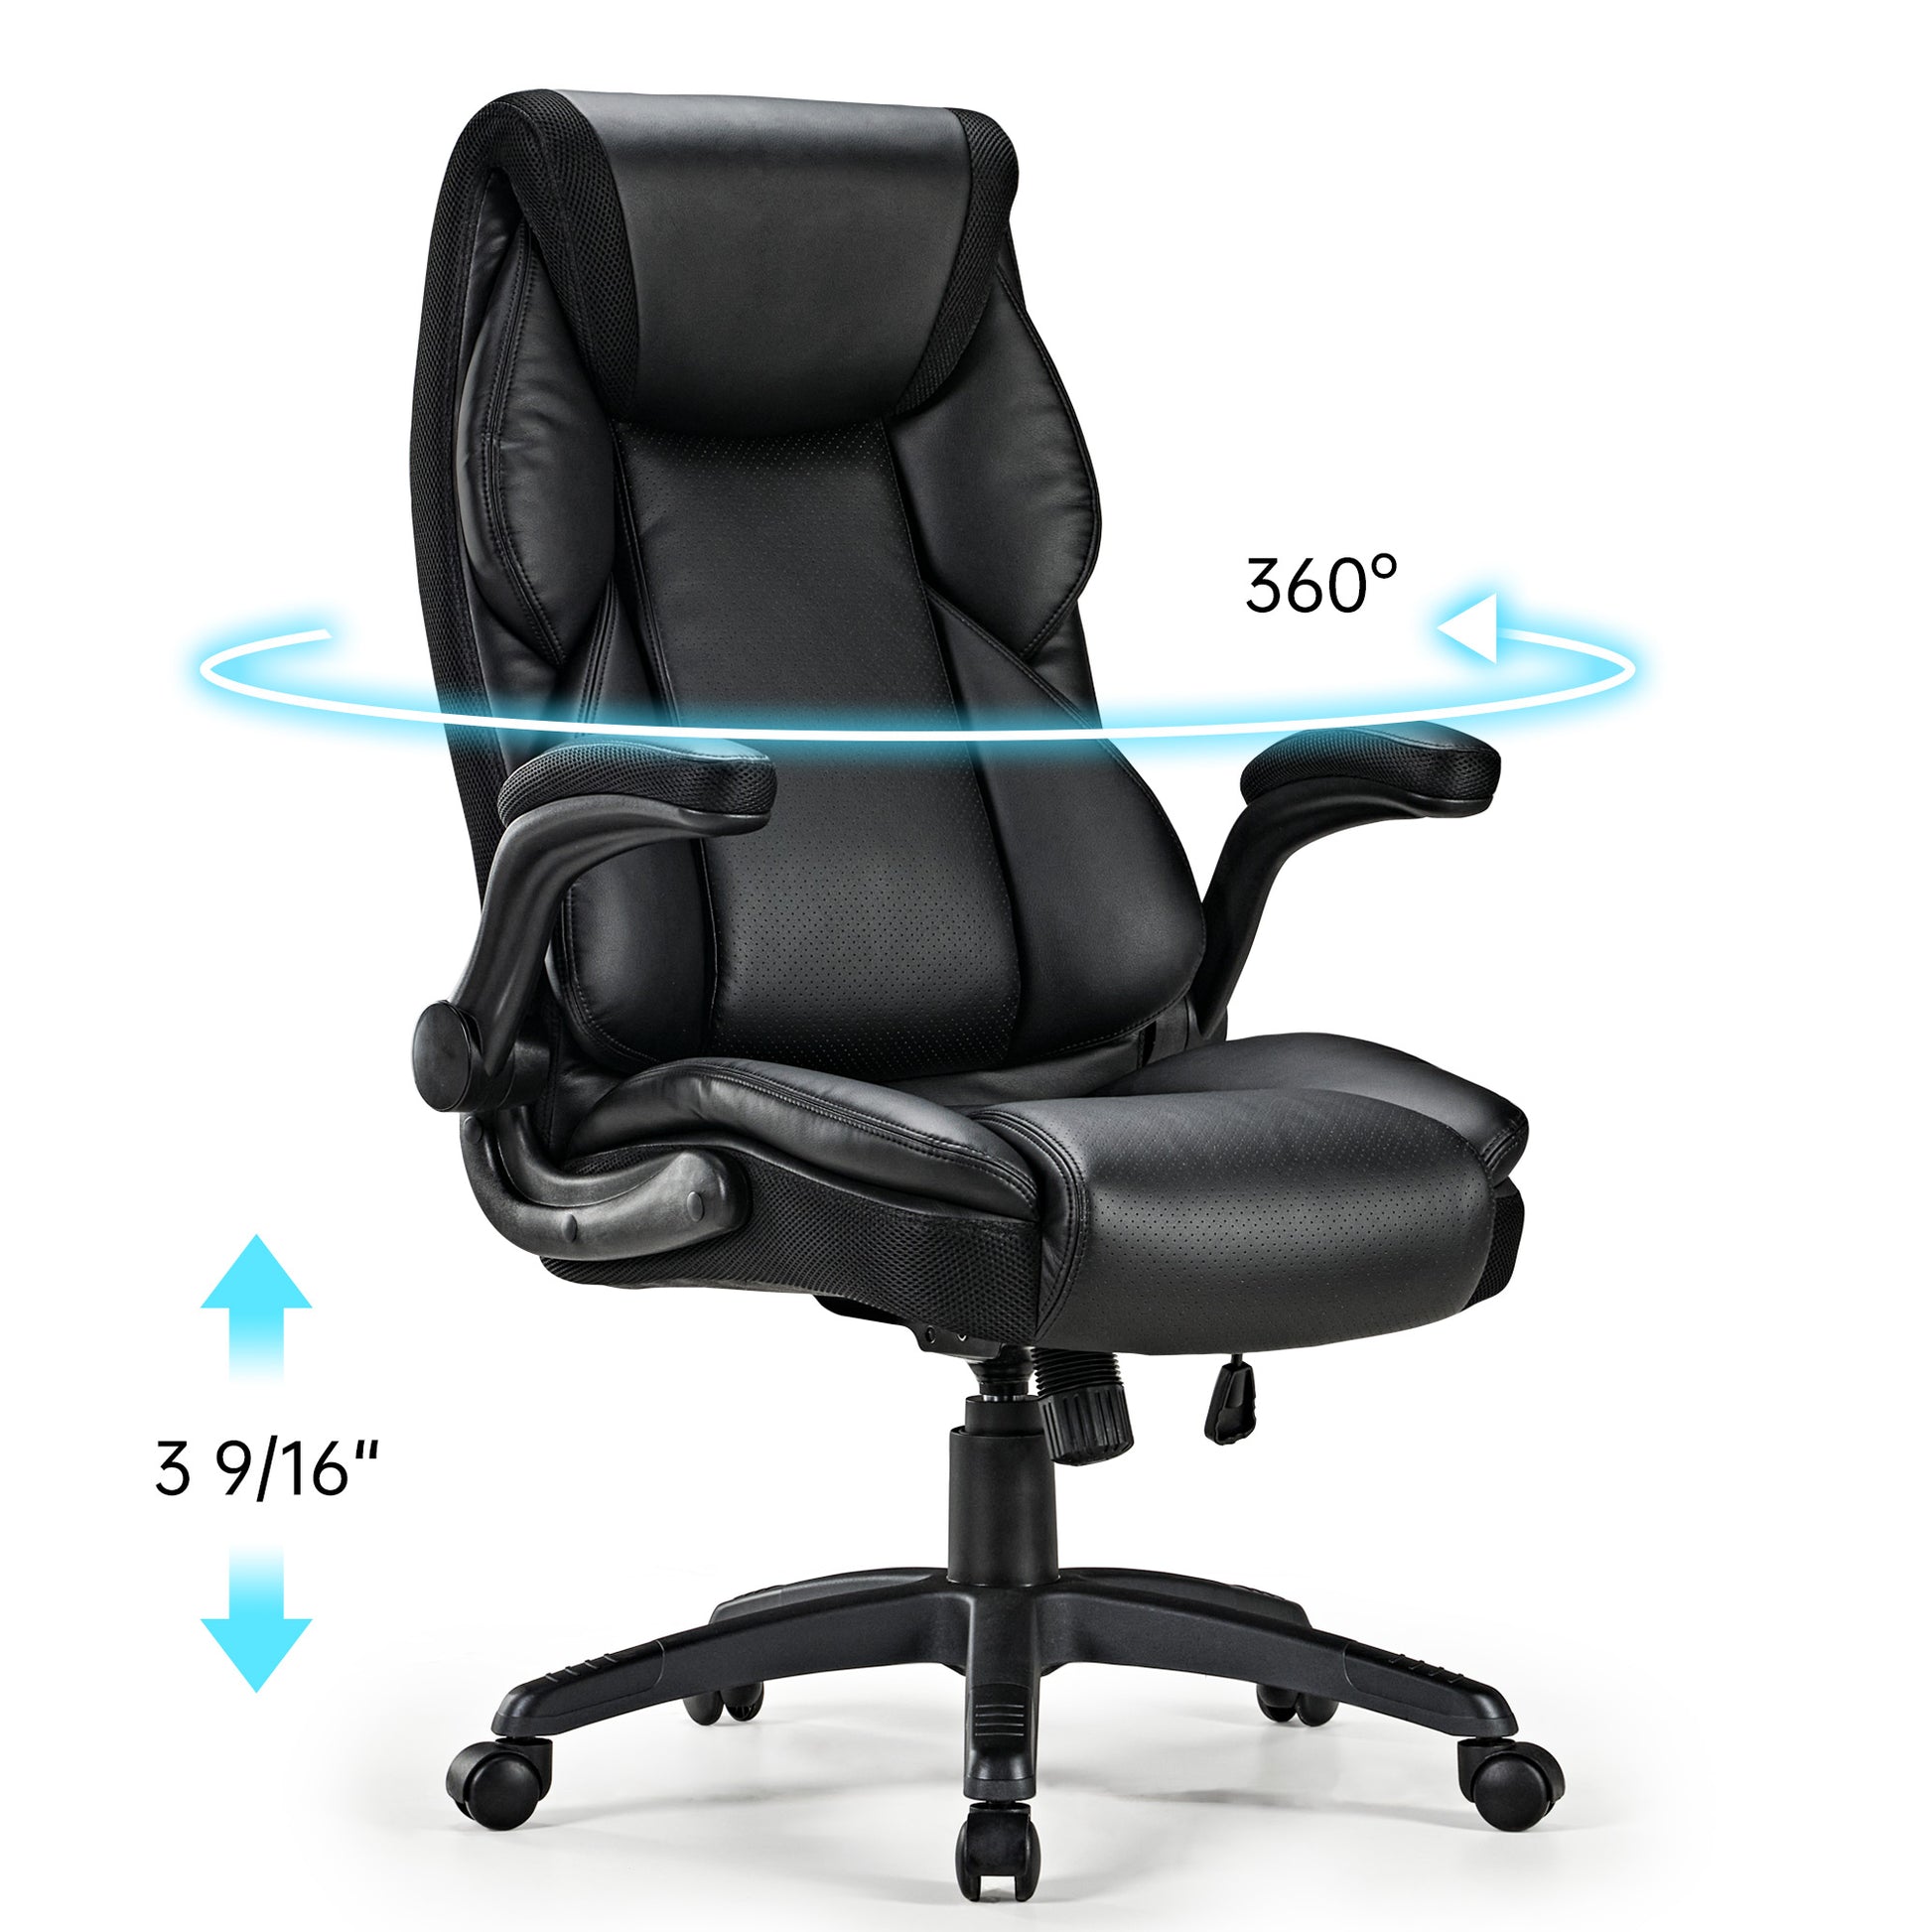 Galene, Home Office Chair, Black, Breathable cushioned PU Leather Fabric, 360 degree rotation